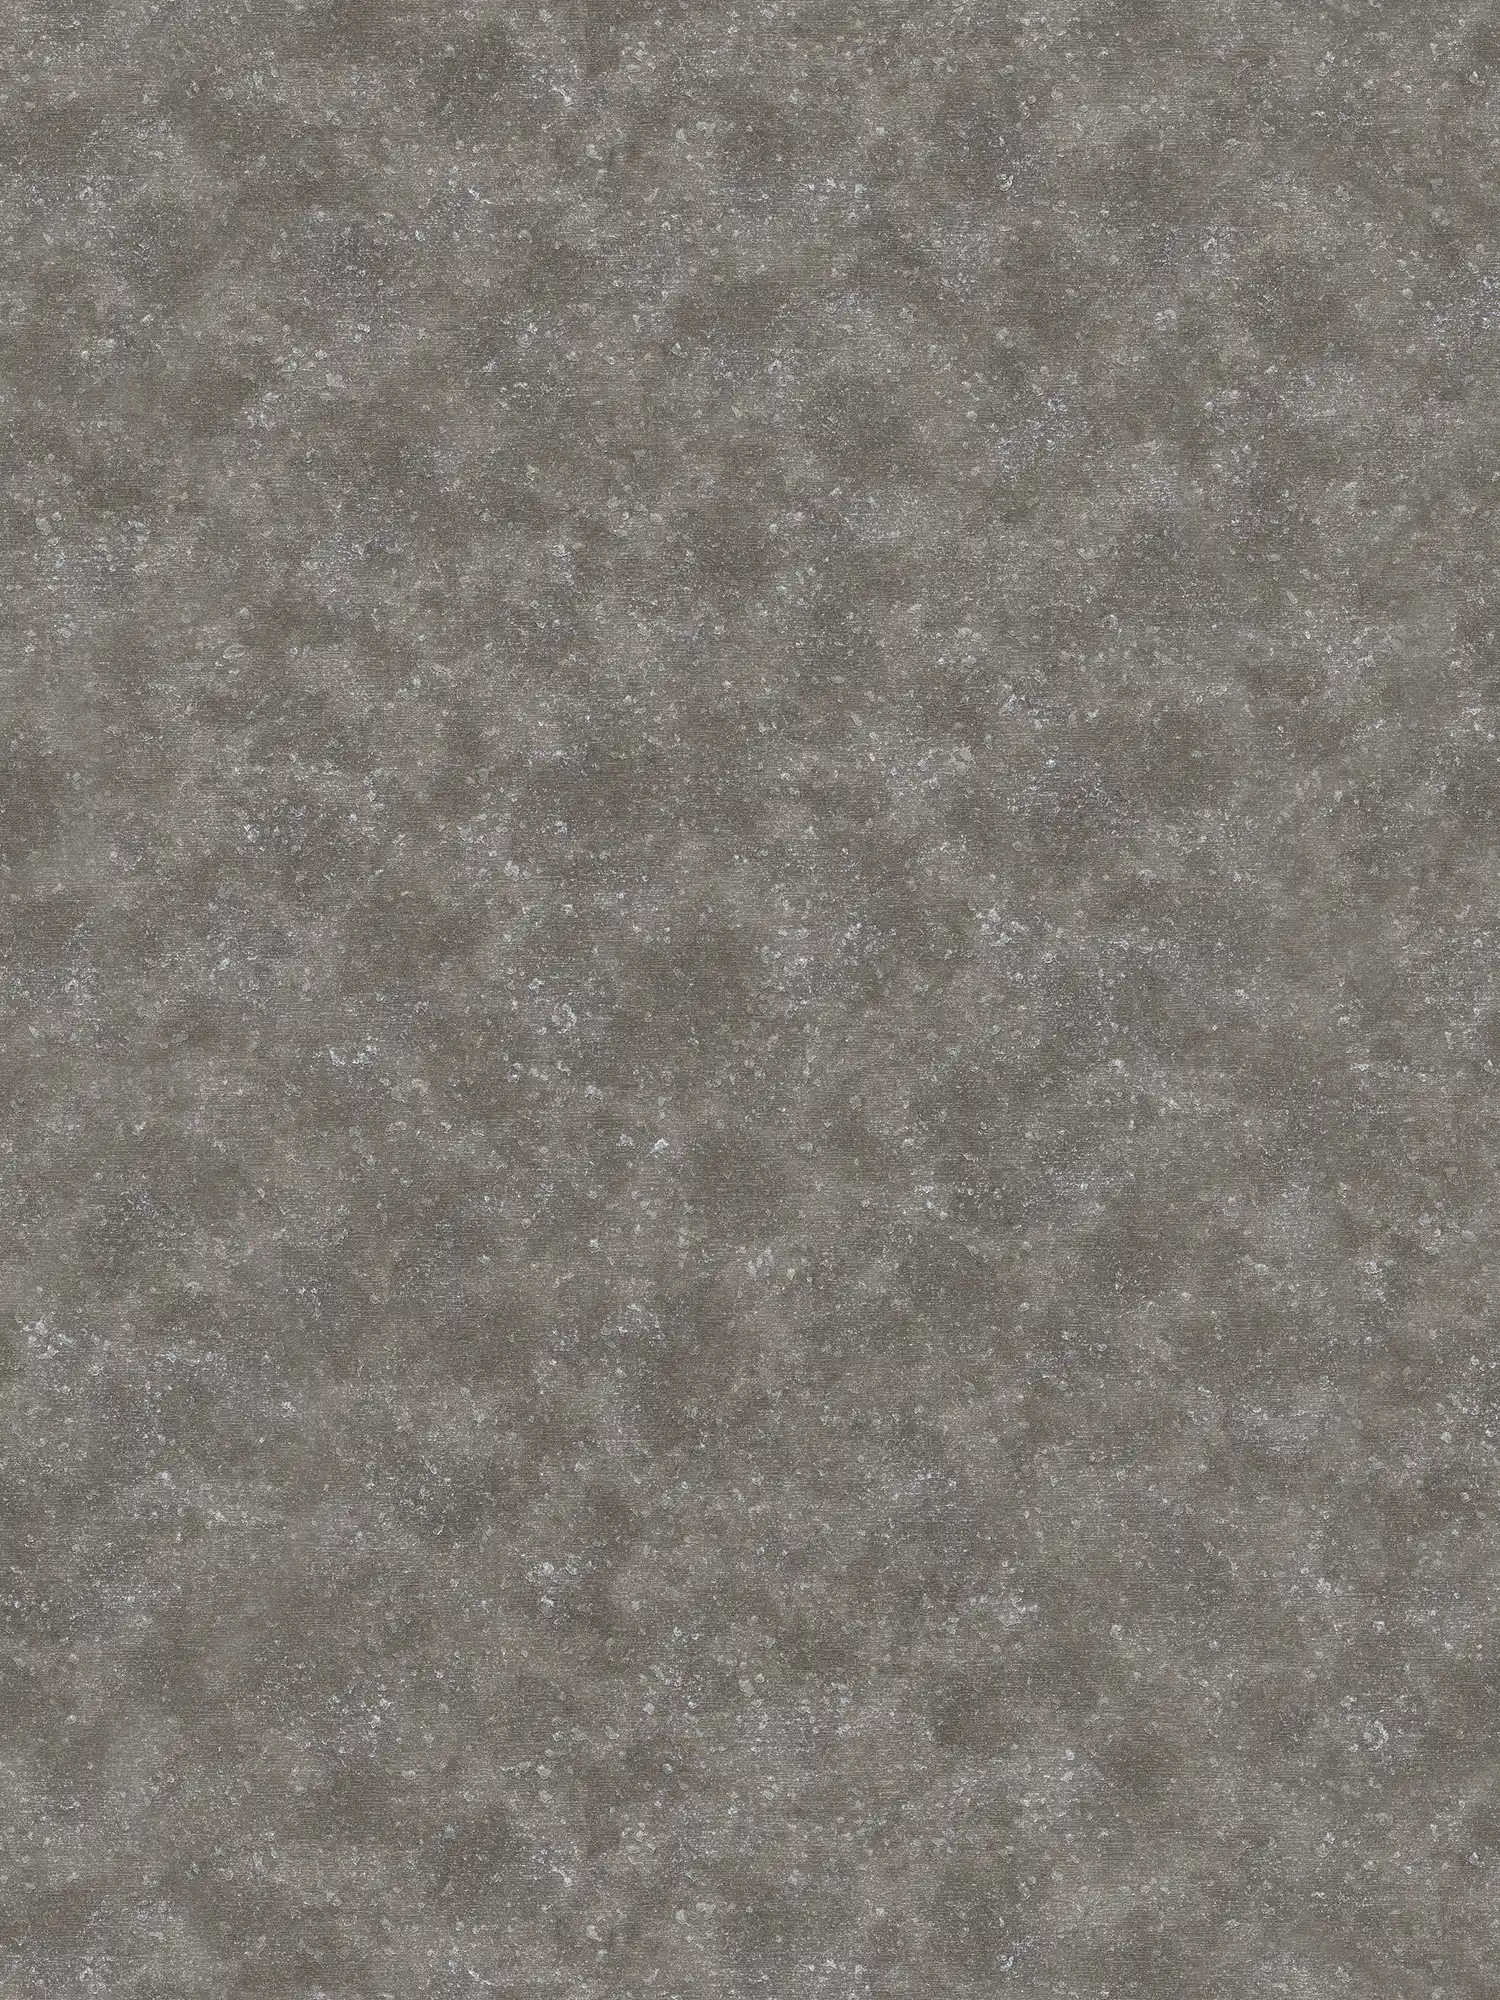 Industrail style wallpaper natural stone grey with texture effect
